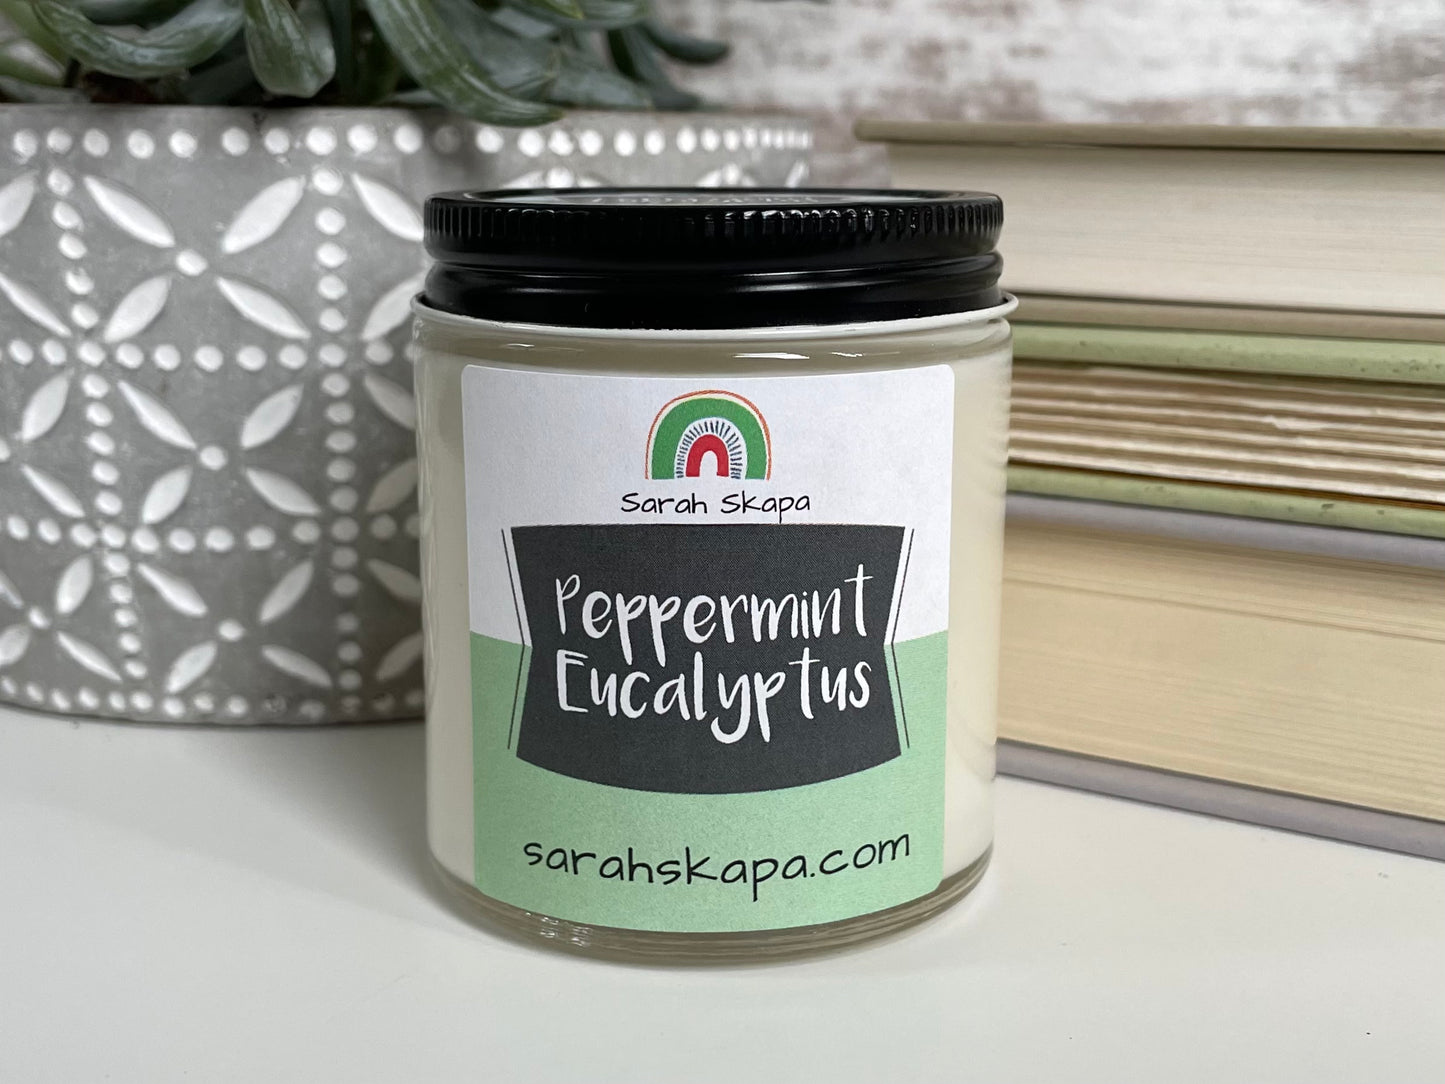 Peppermint Eucalyptus Scented Soy Candle